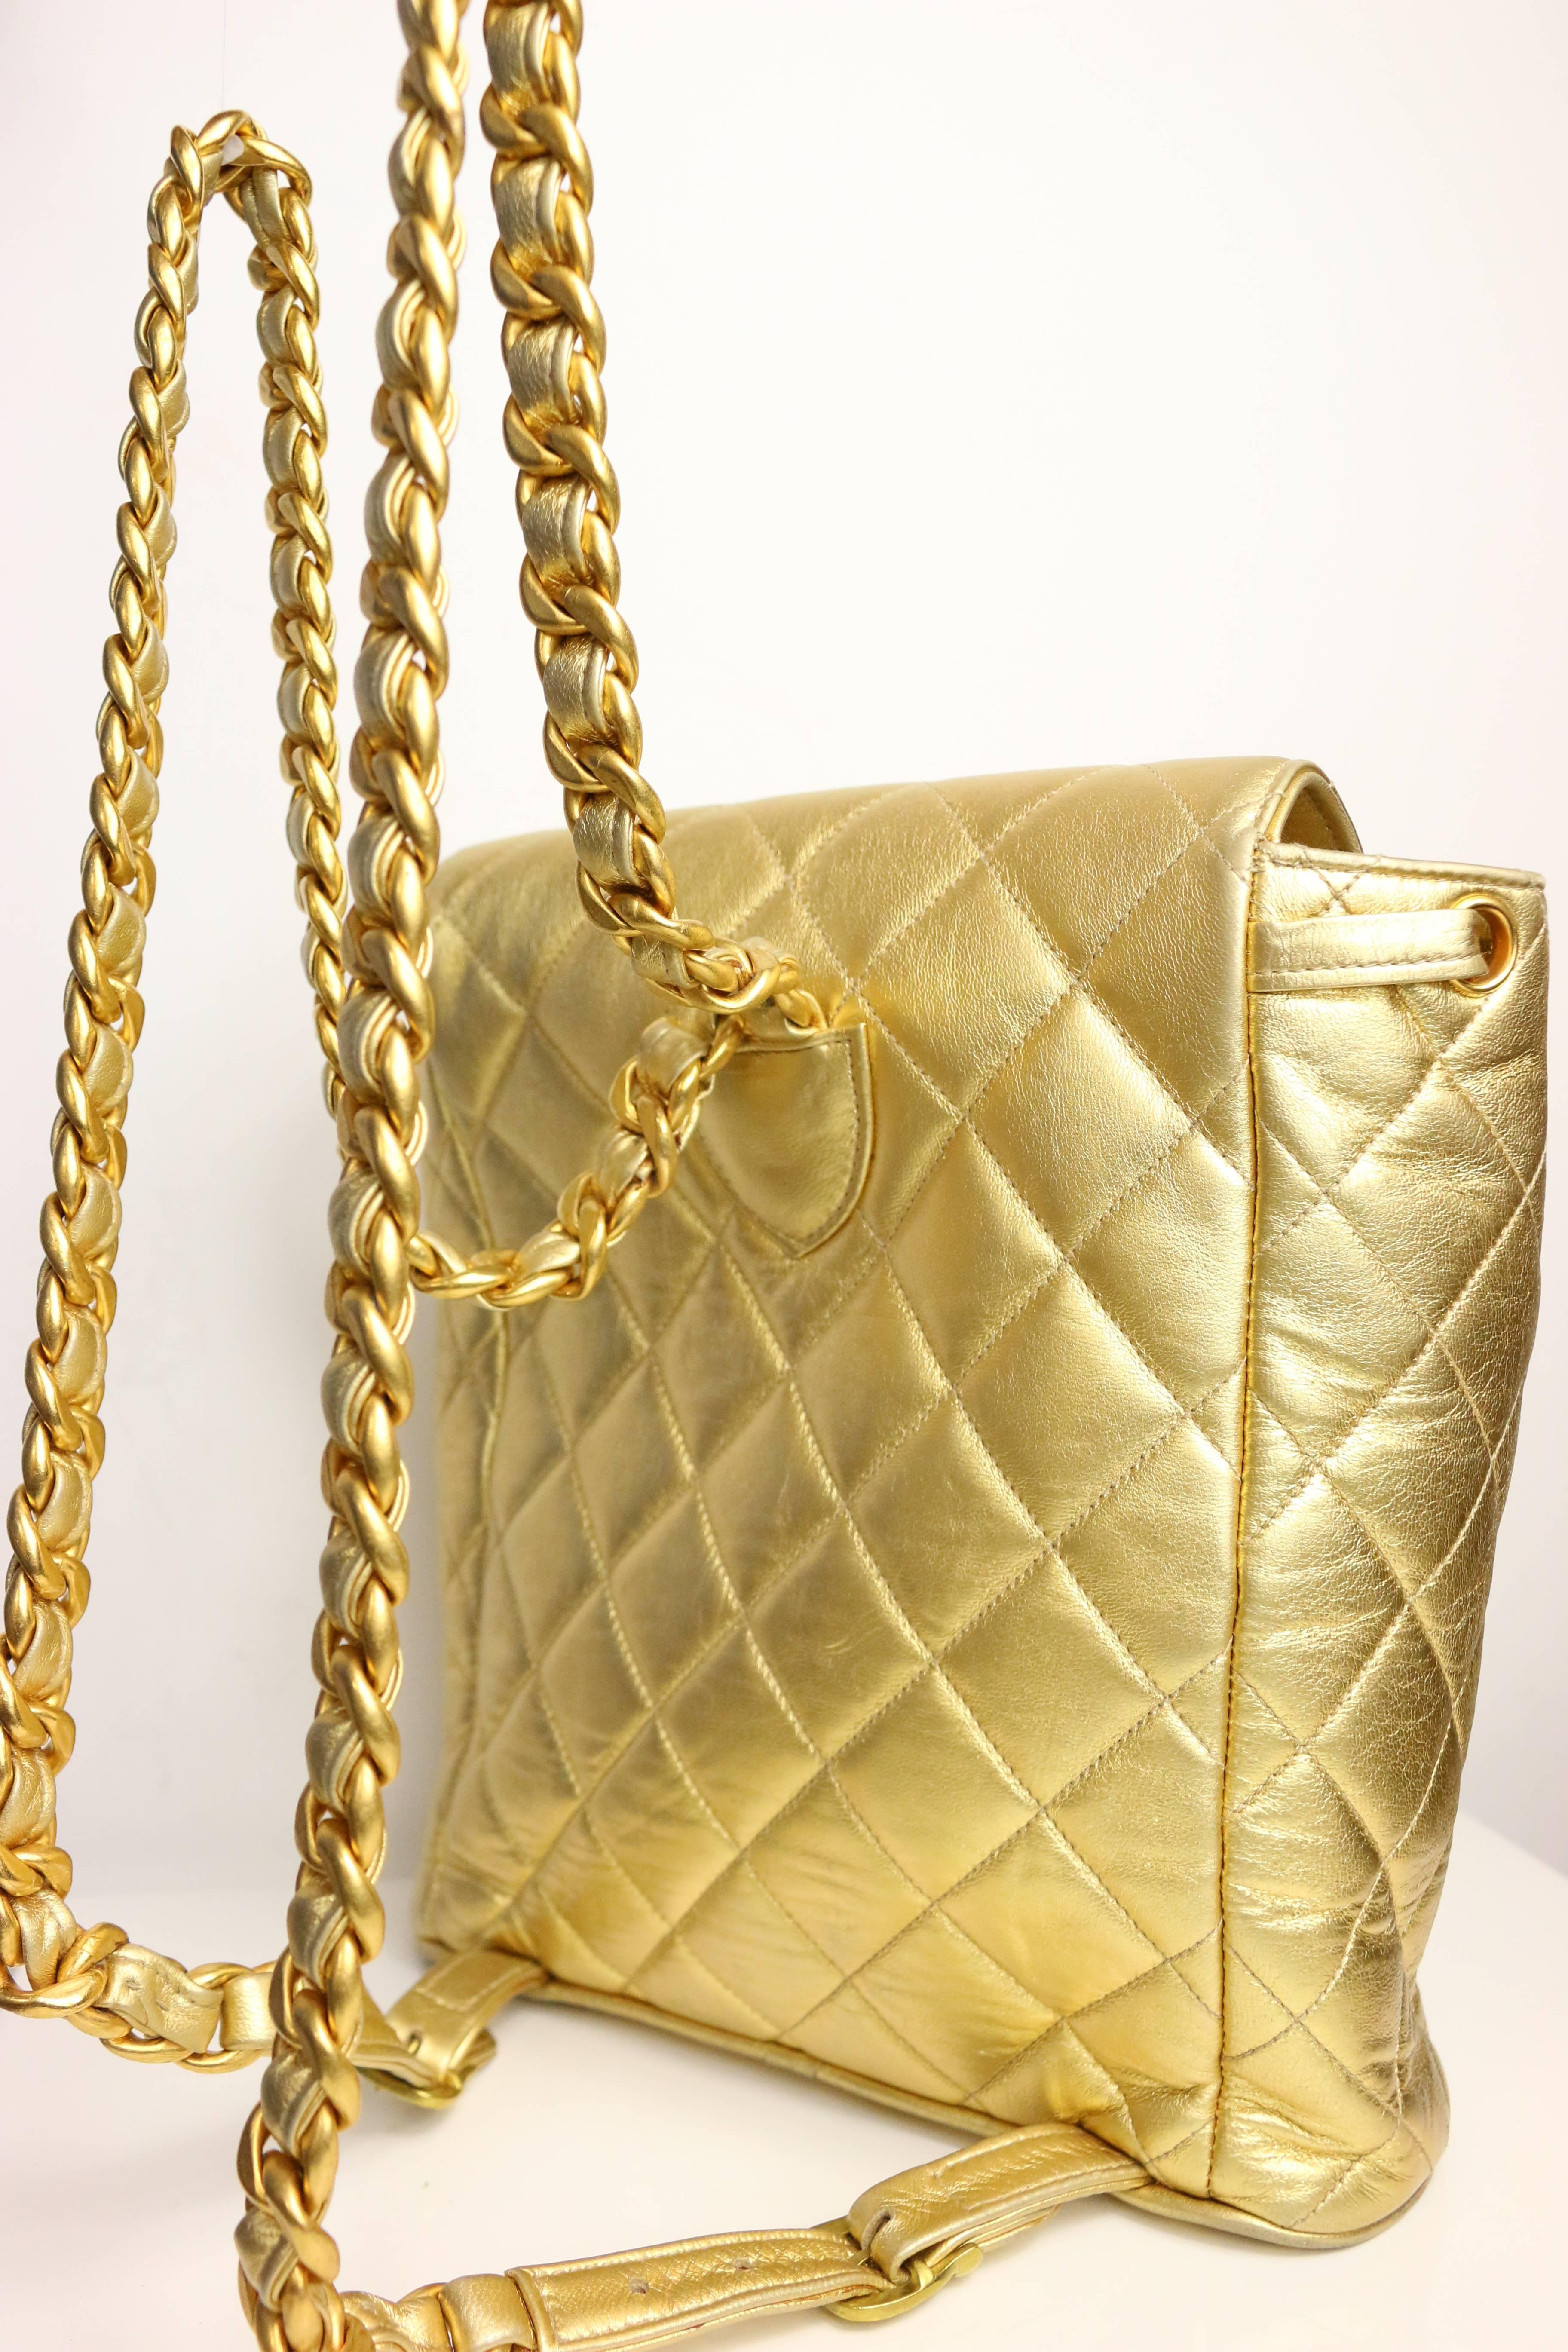 - Vintage 90s Chanel rare gold lambskin backpack bag. 

- W: 22cm (8.66 inches) x H: 23cm (9.05 inches) x D: 10cm (3.93 inches). 

